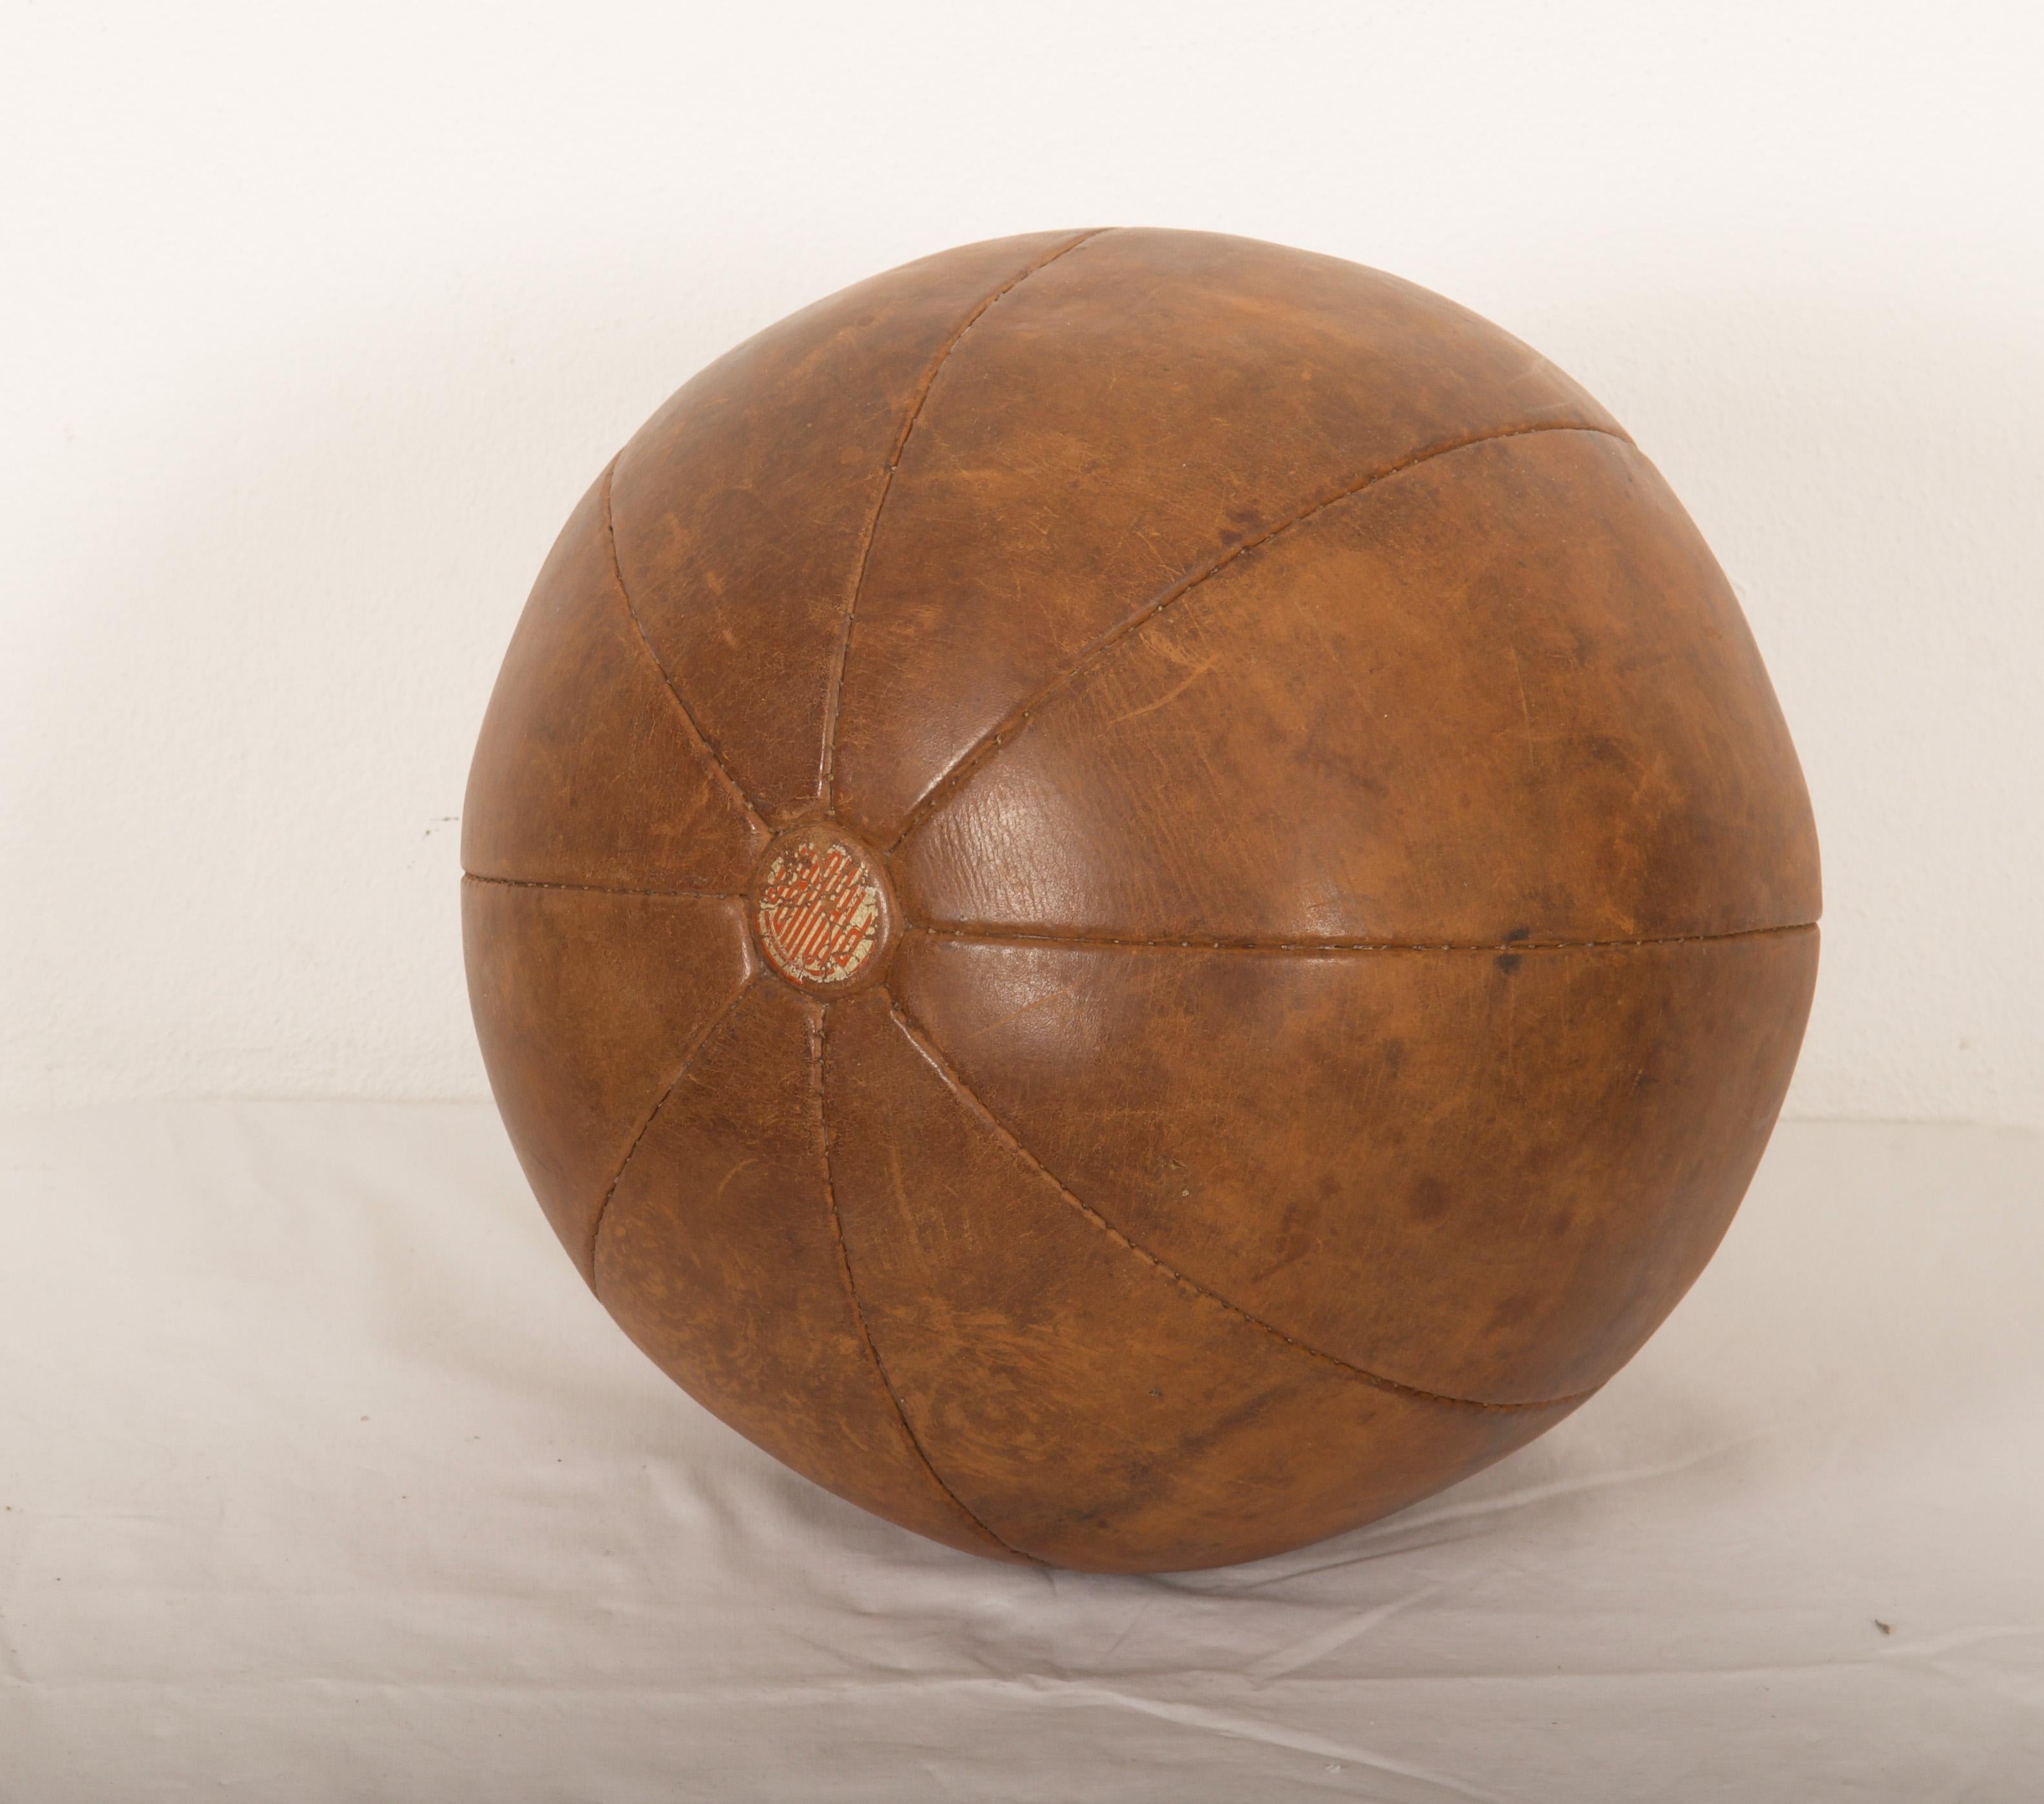 Original patinated leather medicine ball with a branded manufacturers mark 